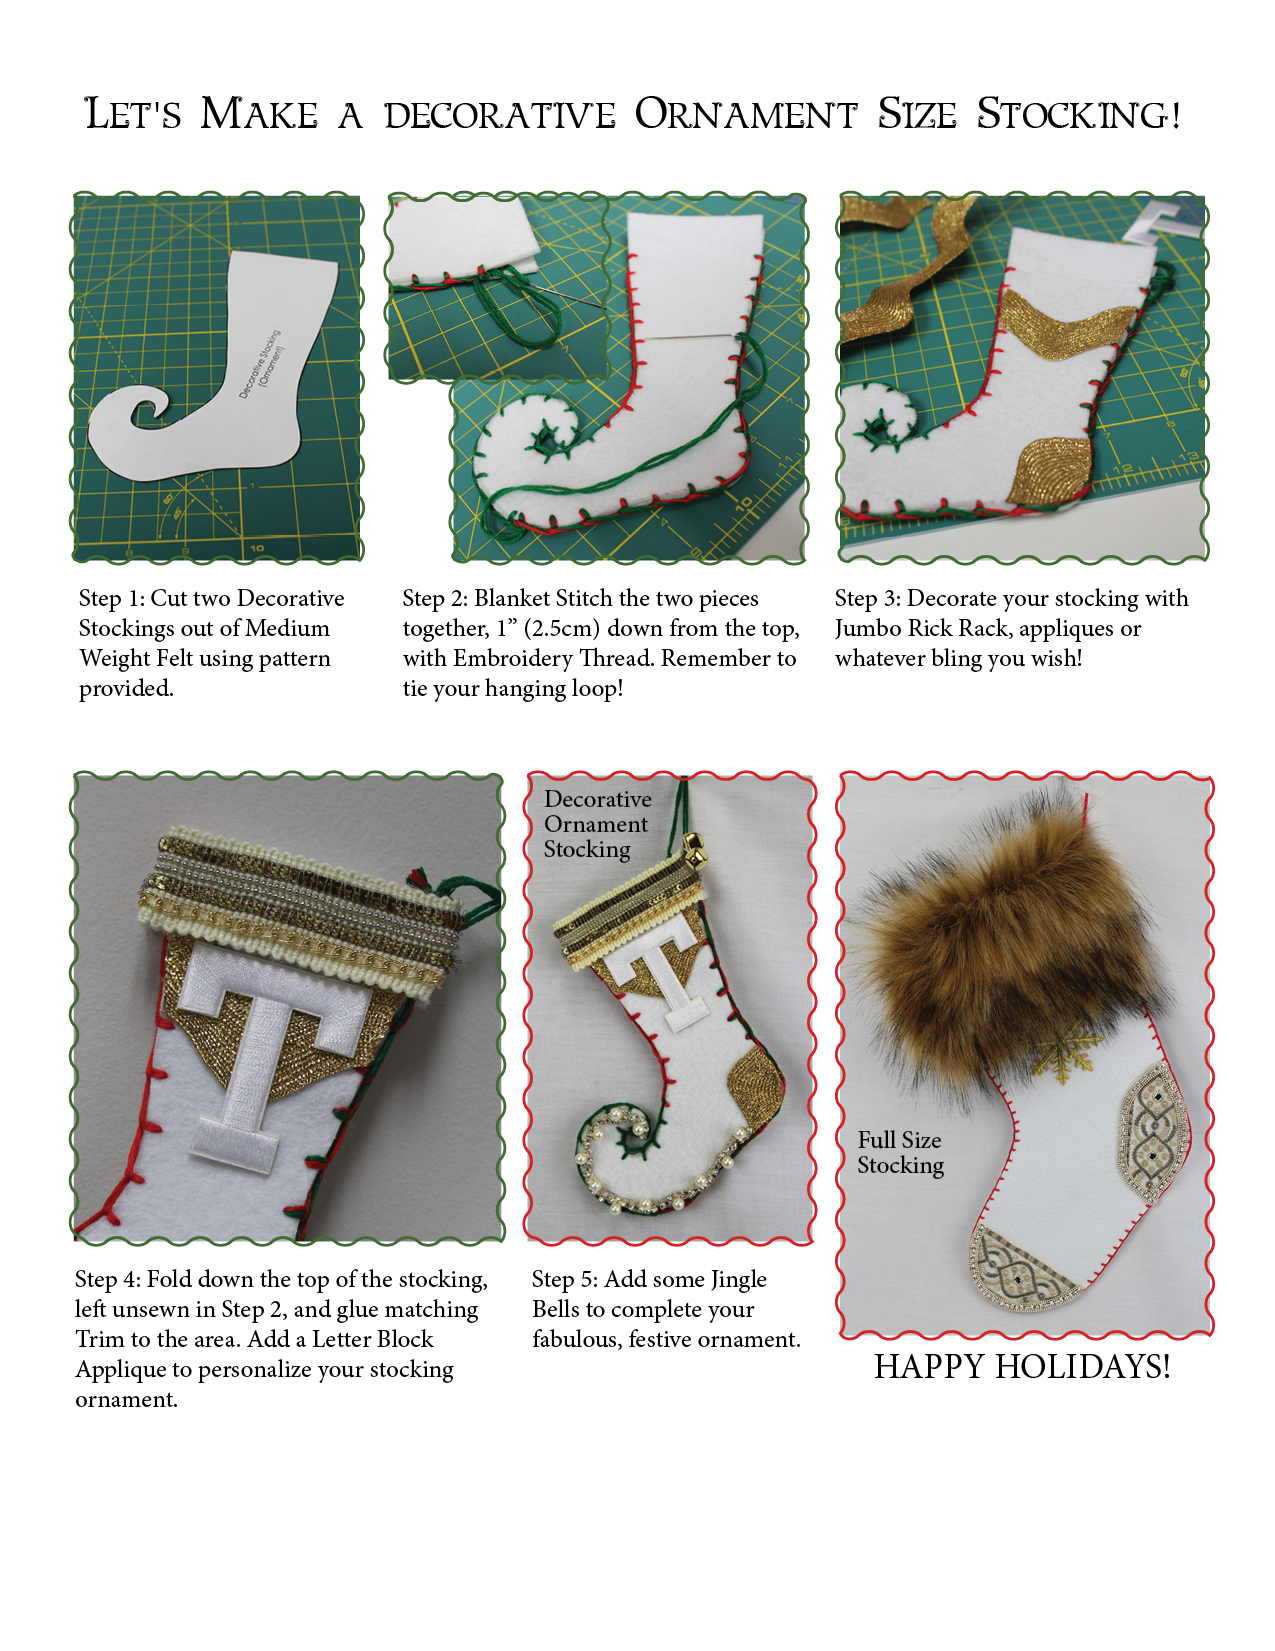 Six steps to decorating your Christmas bling stockings